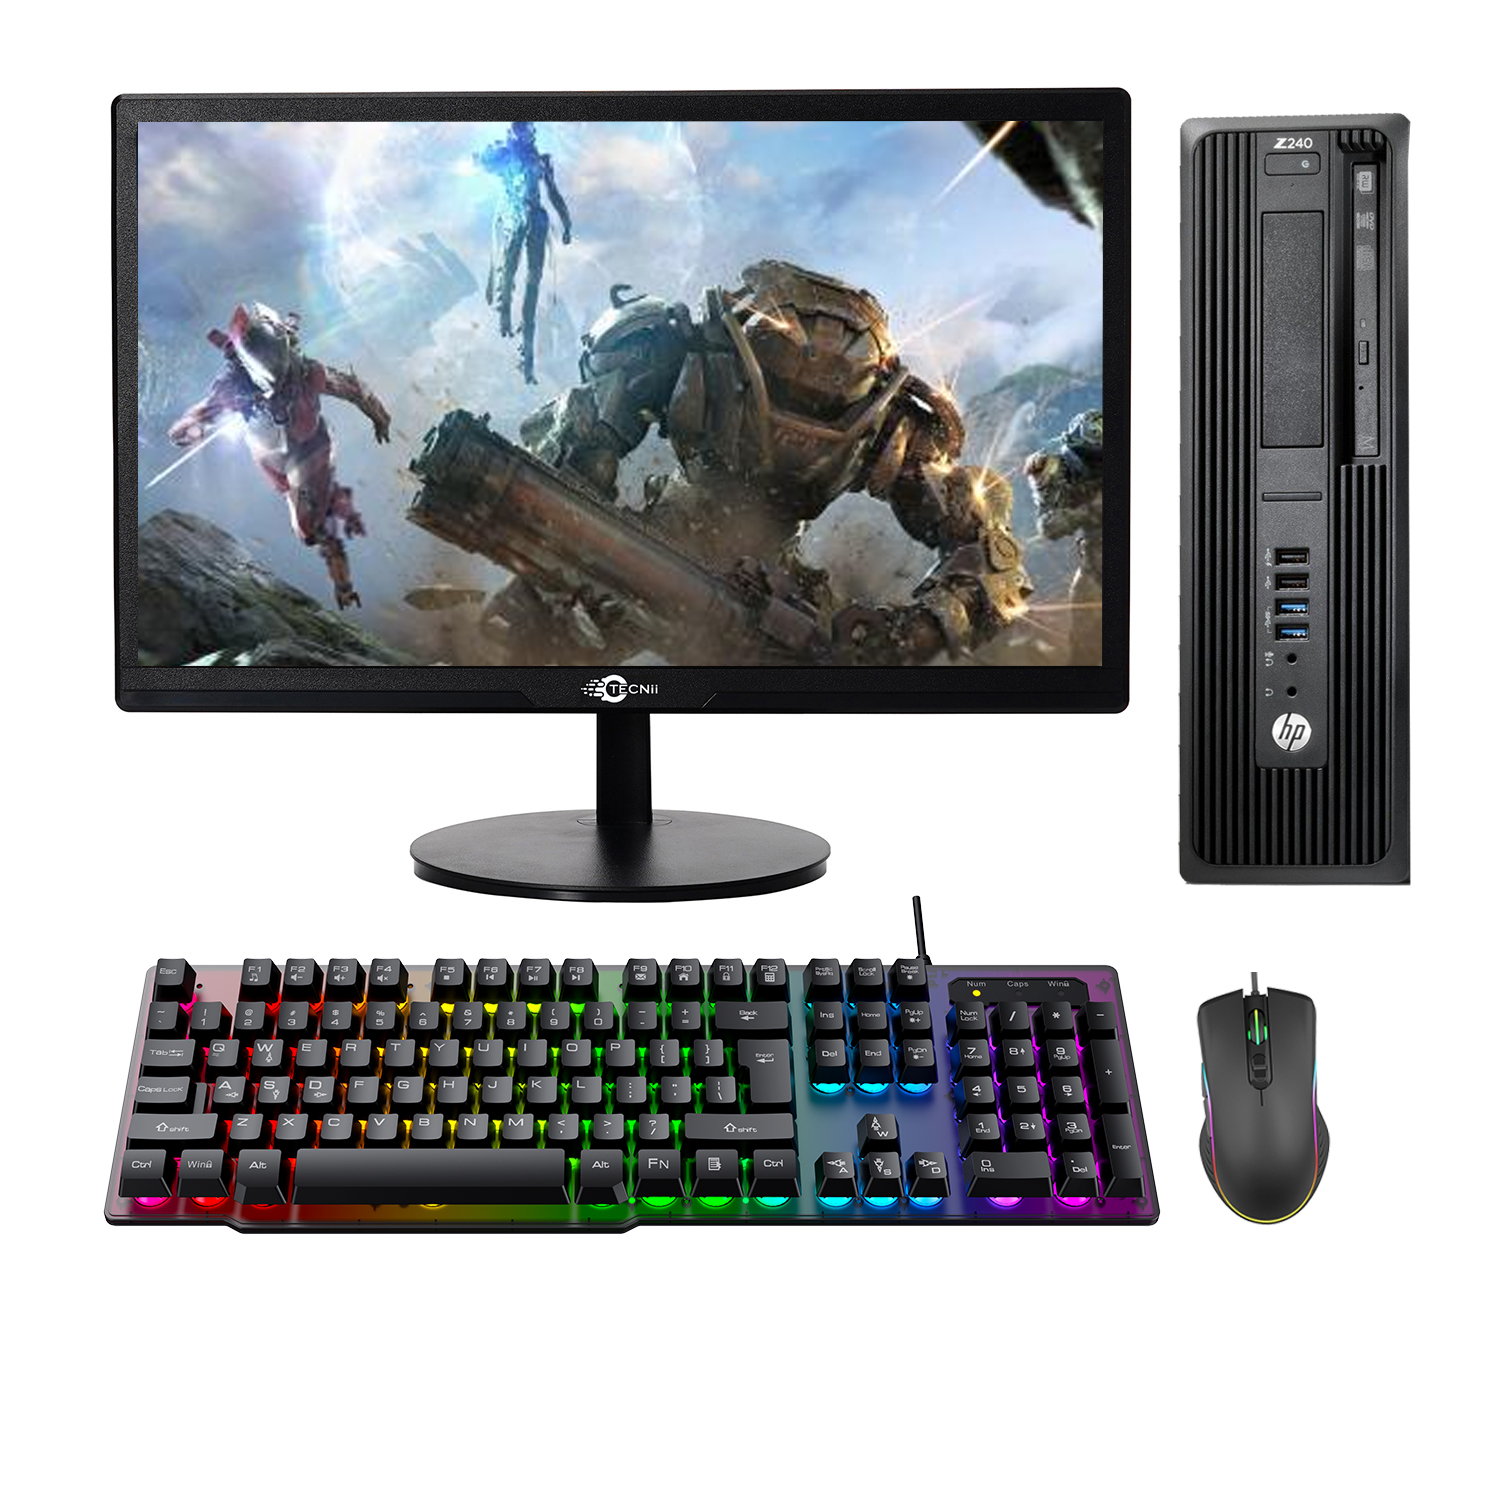 (Refurbished Good)-HP Z240 Workstation-Gaming Computer with 24" Monitor|SFF|i5 6500 @3.20GHz|16GB DDR4 RAM 512GB SSD|Nvidia 2GB Graphics card|Gaming Keyboard & Mouse|Win 10 Pro